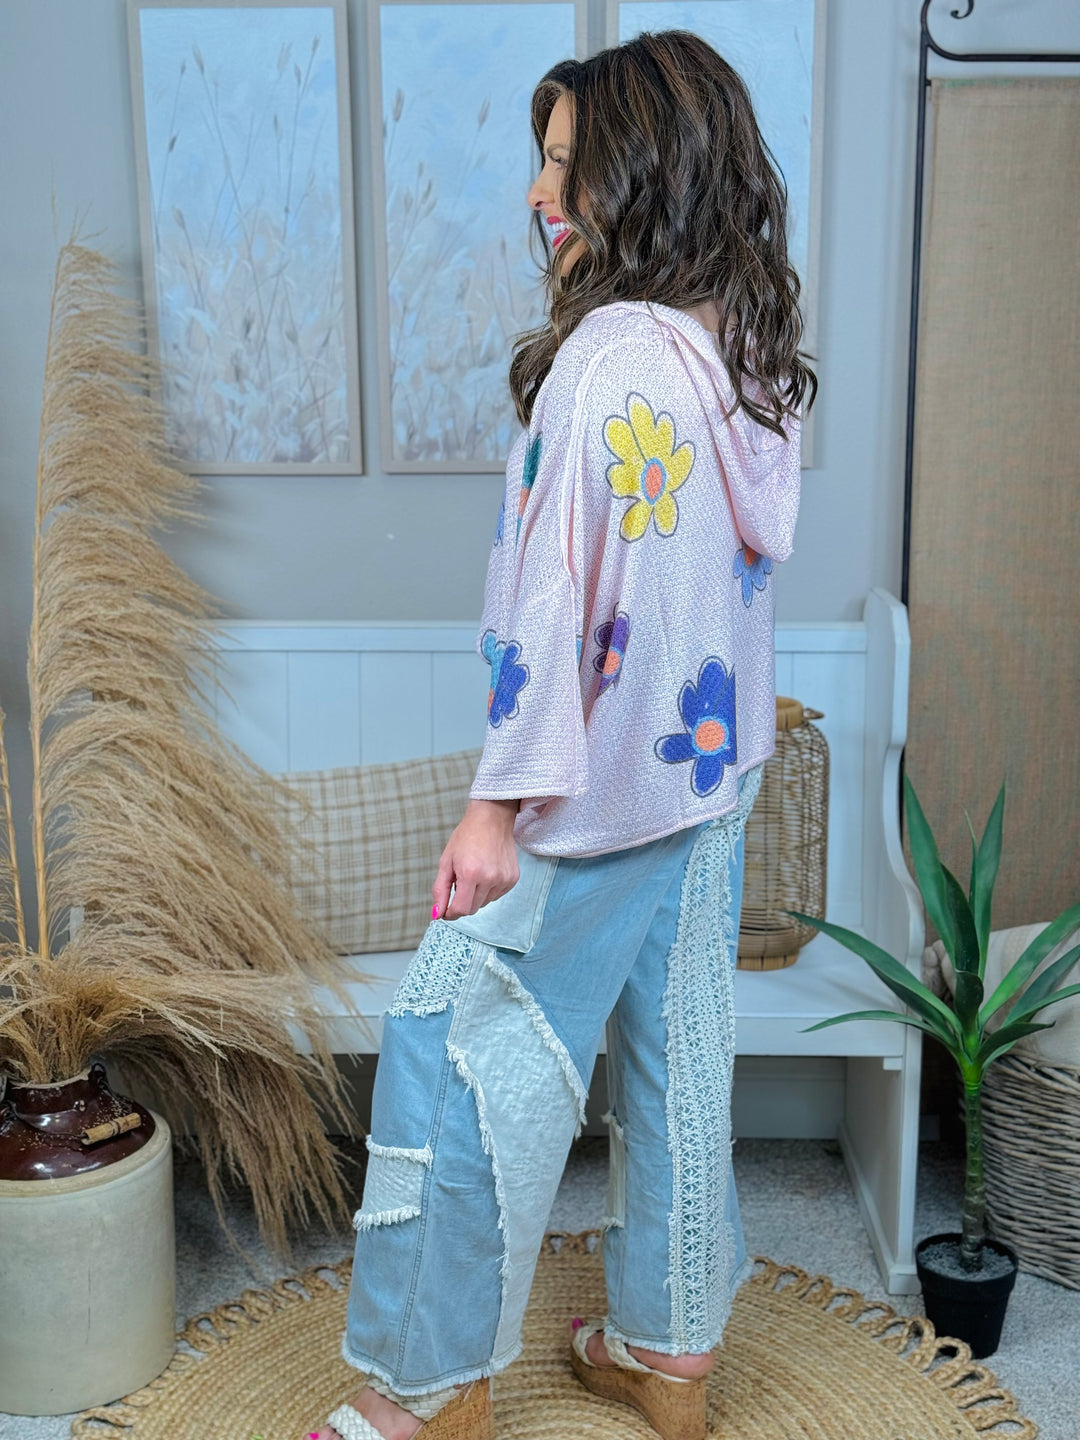 POL Pre-Order - Denim W/ Lace Detail and Patches - FINAL SALE